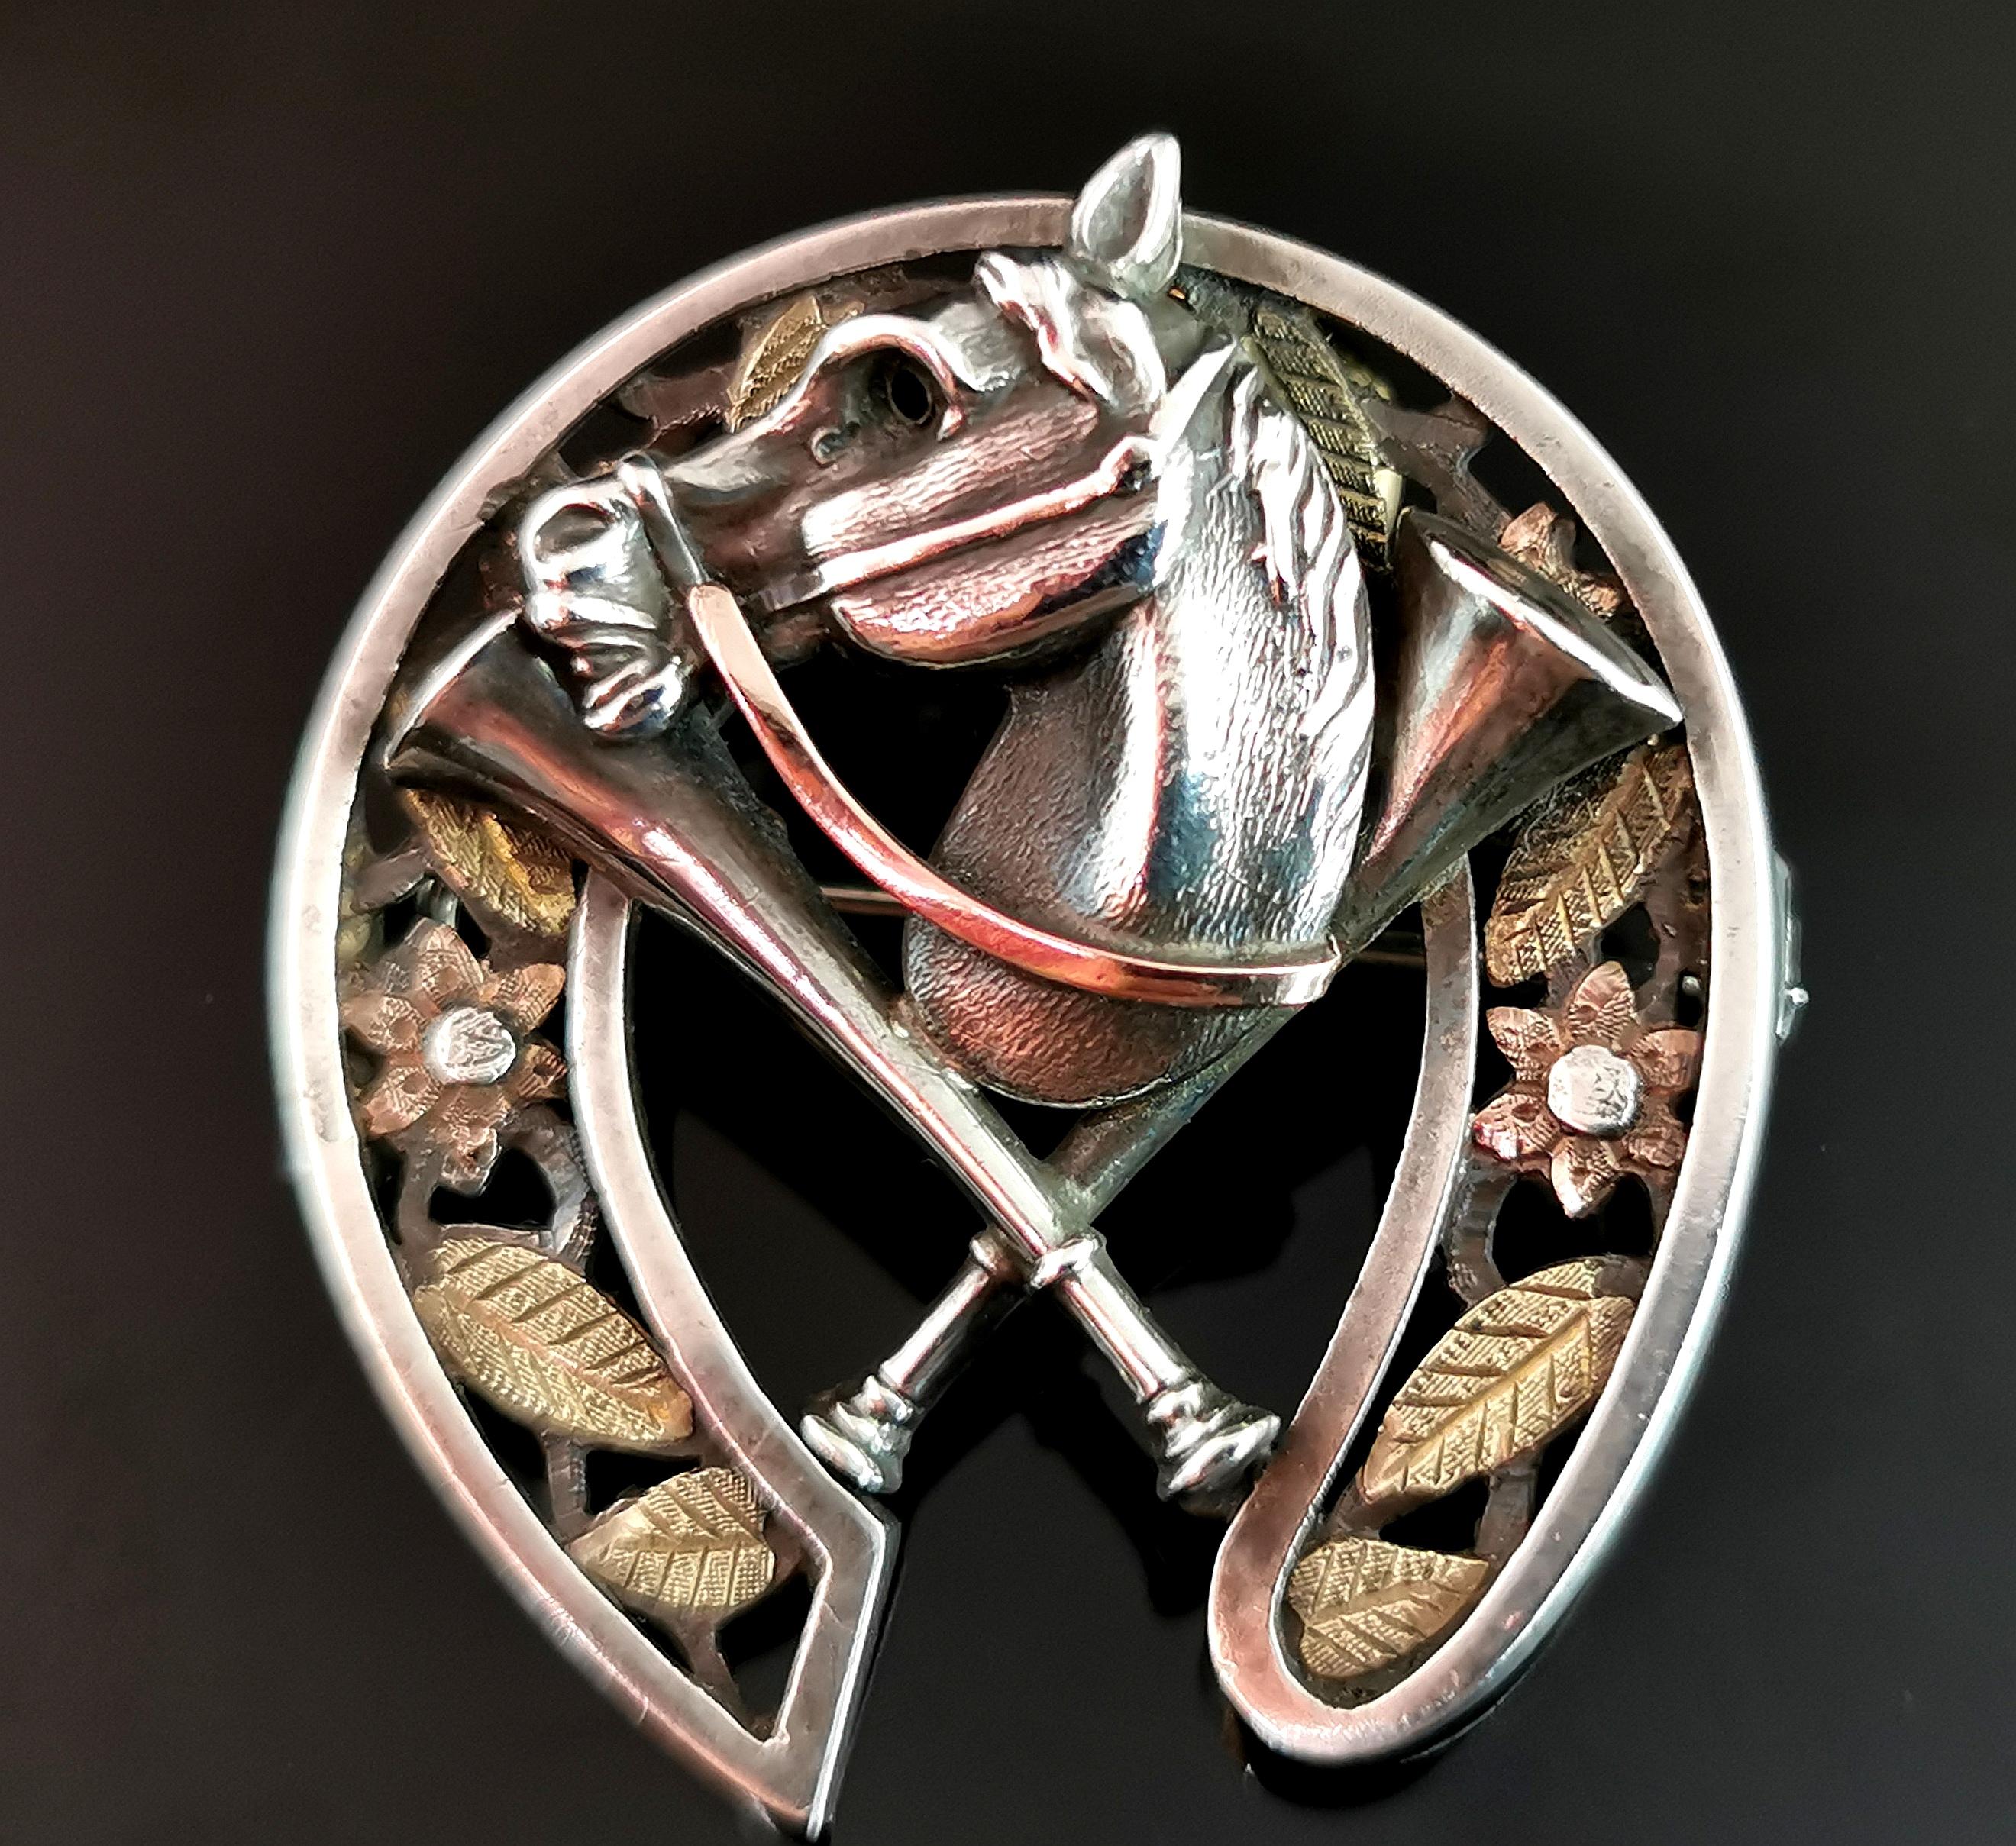 A scarce and unusual antique Victorian era brooch.

It is modelled as a horseshoe in sterling silver with bi colour, yellow and rose gold foliate overlay around the shoe.

The centre has a sterling silver horses head wearing a bridle with Rose gold